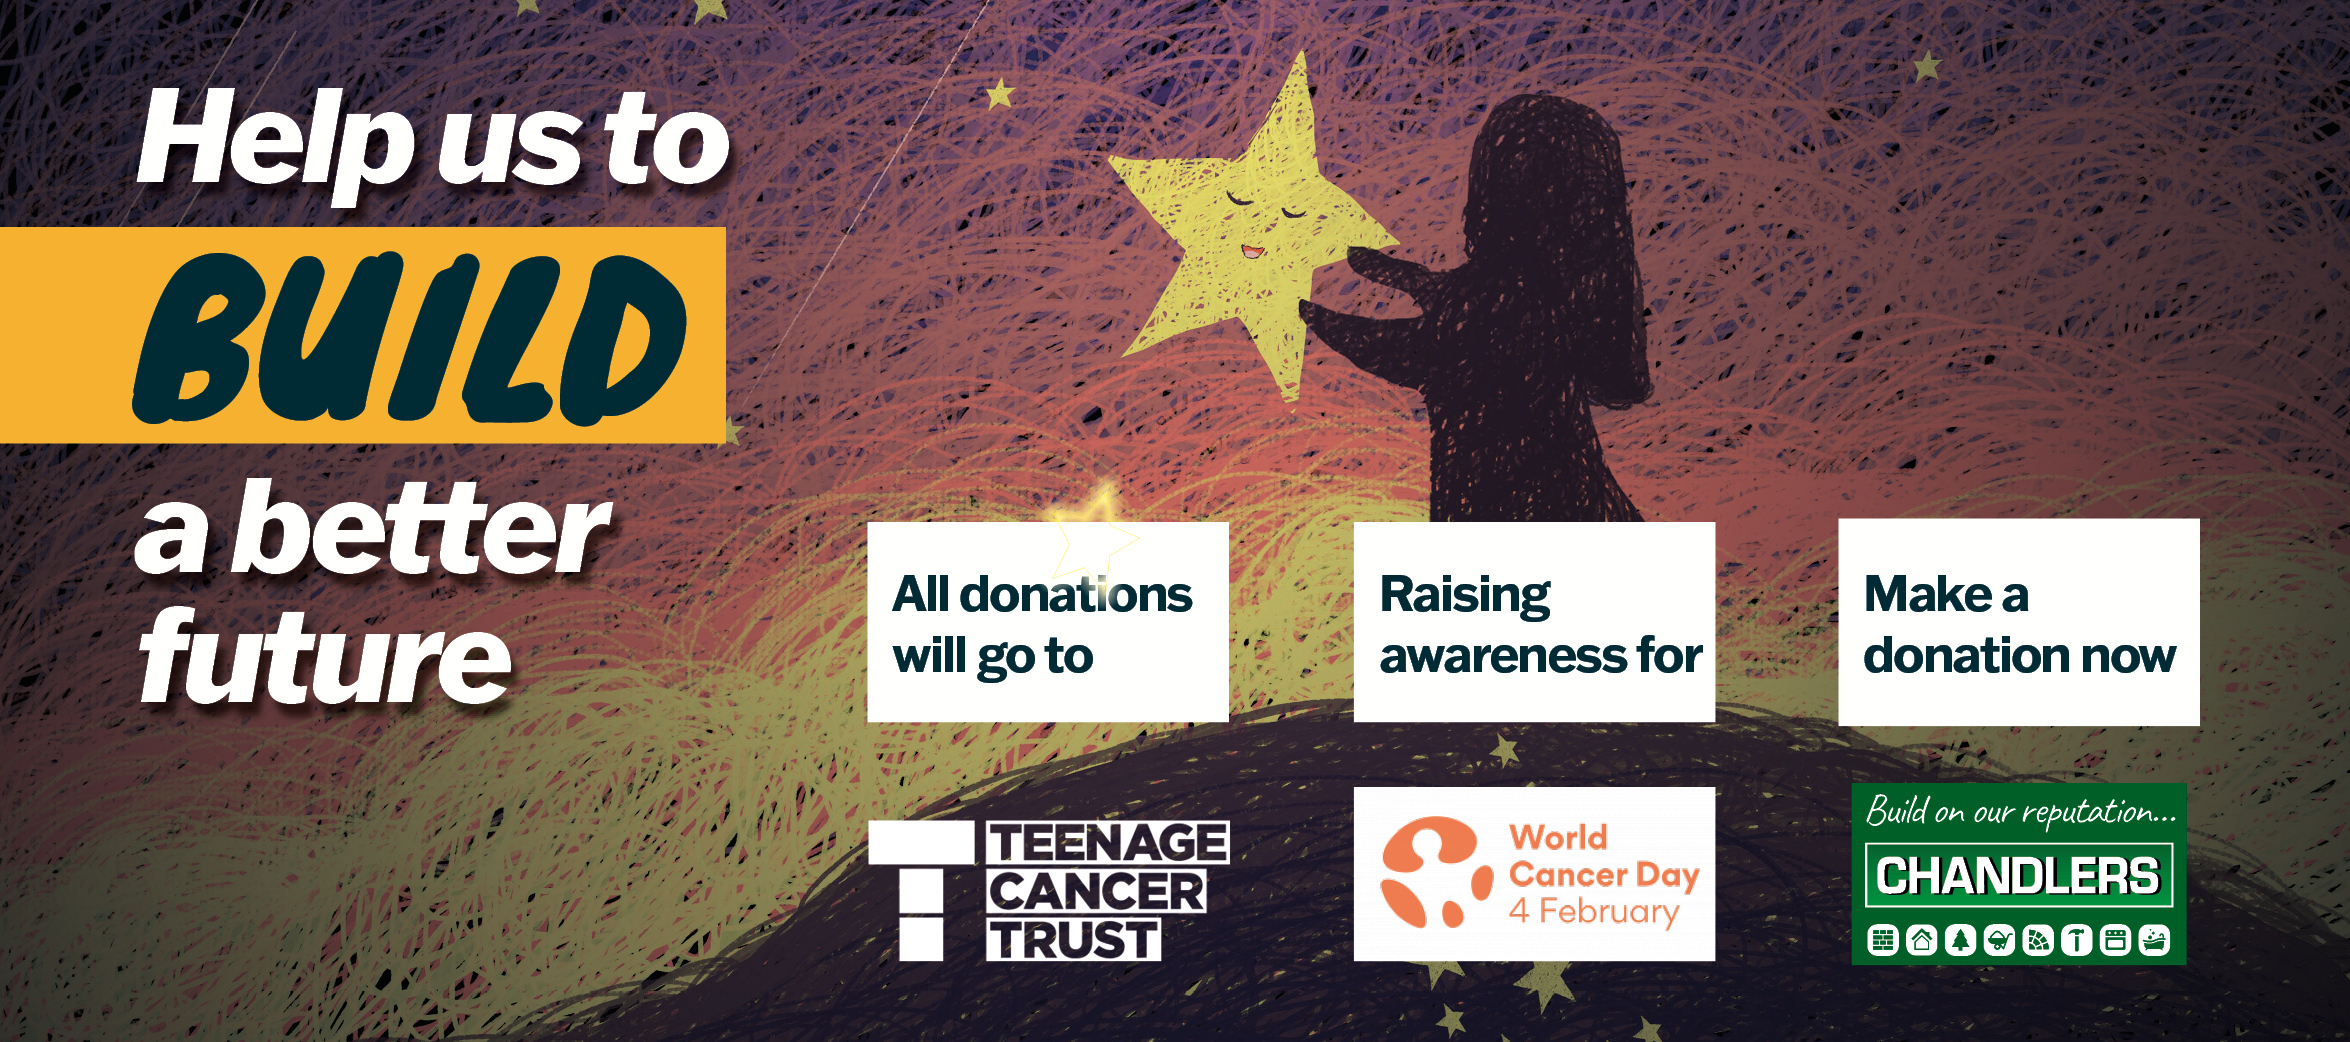 Supporting World Cancer Day by Fundraising for Teenage Cancer Trust